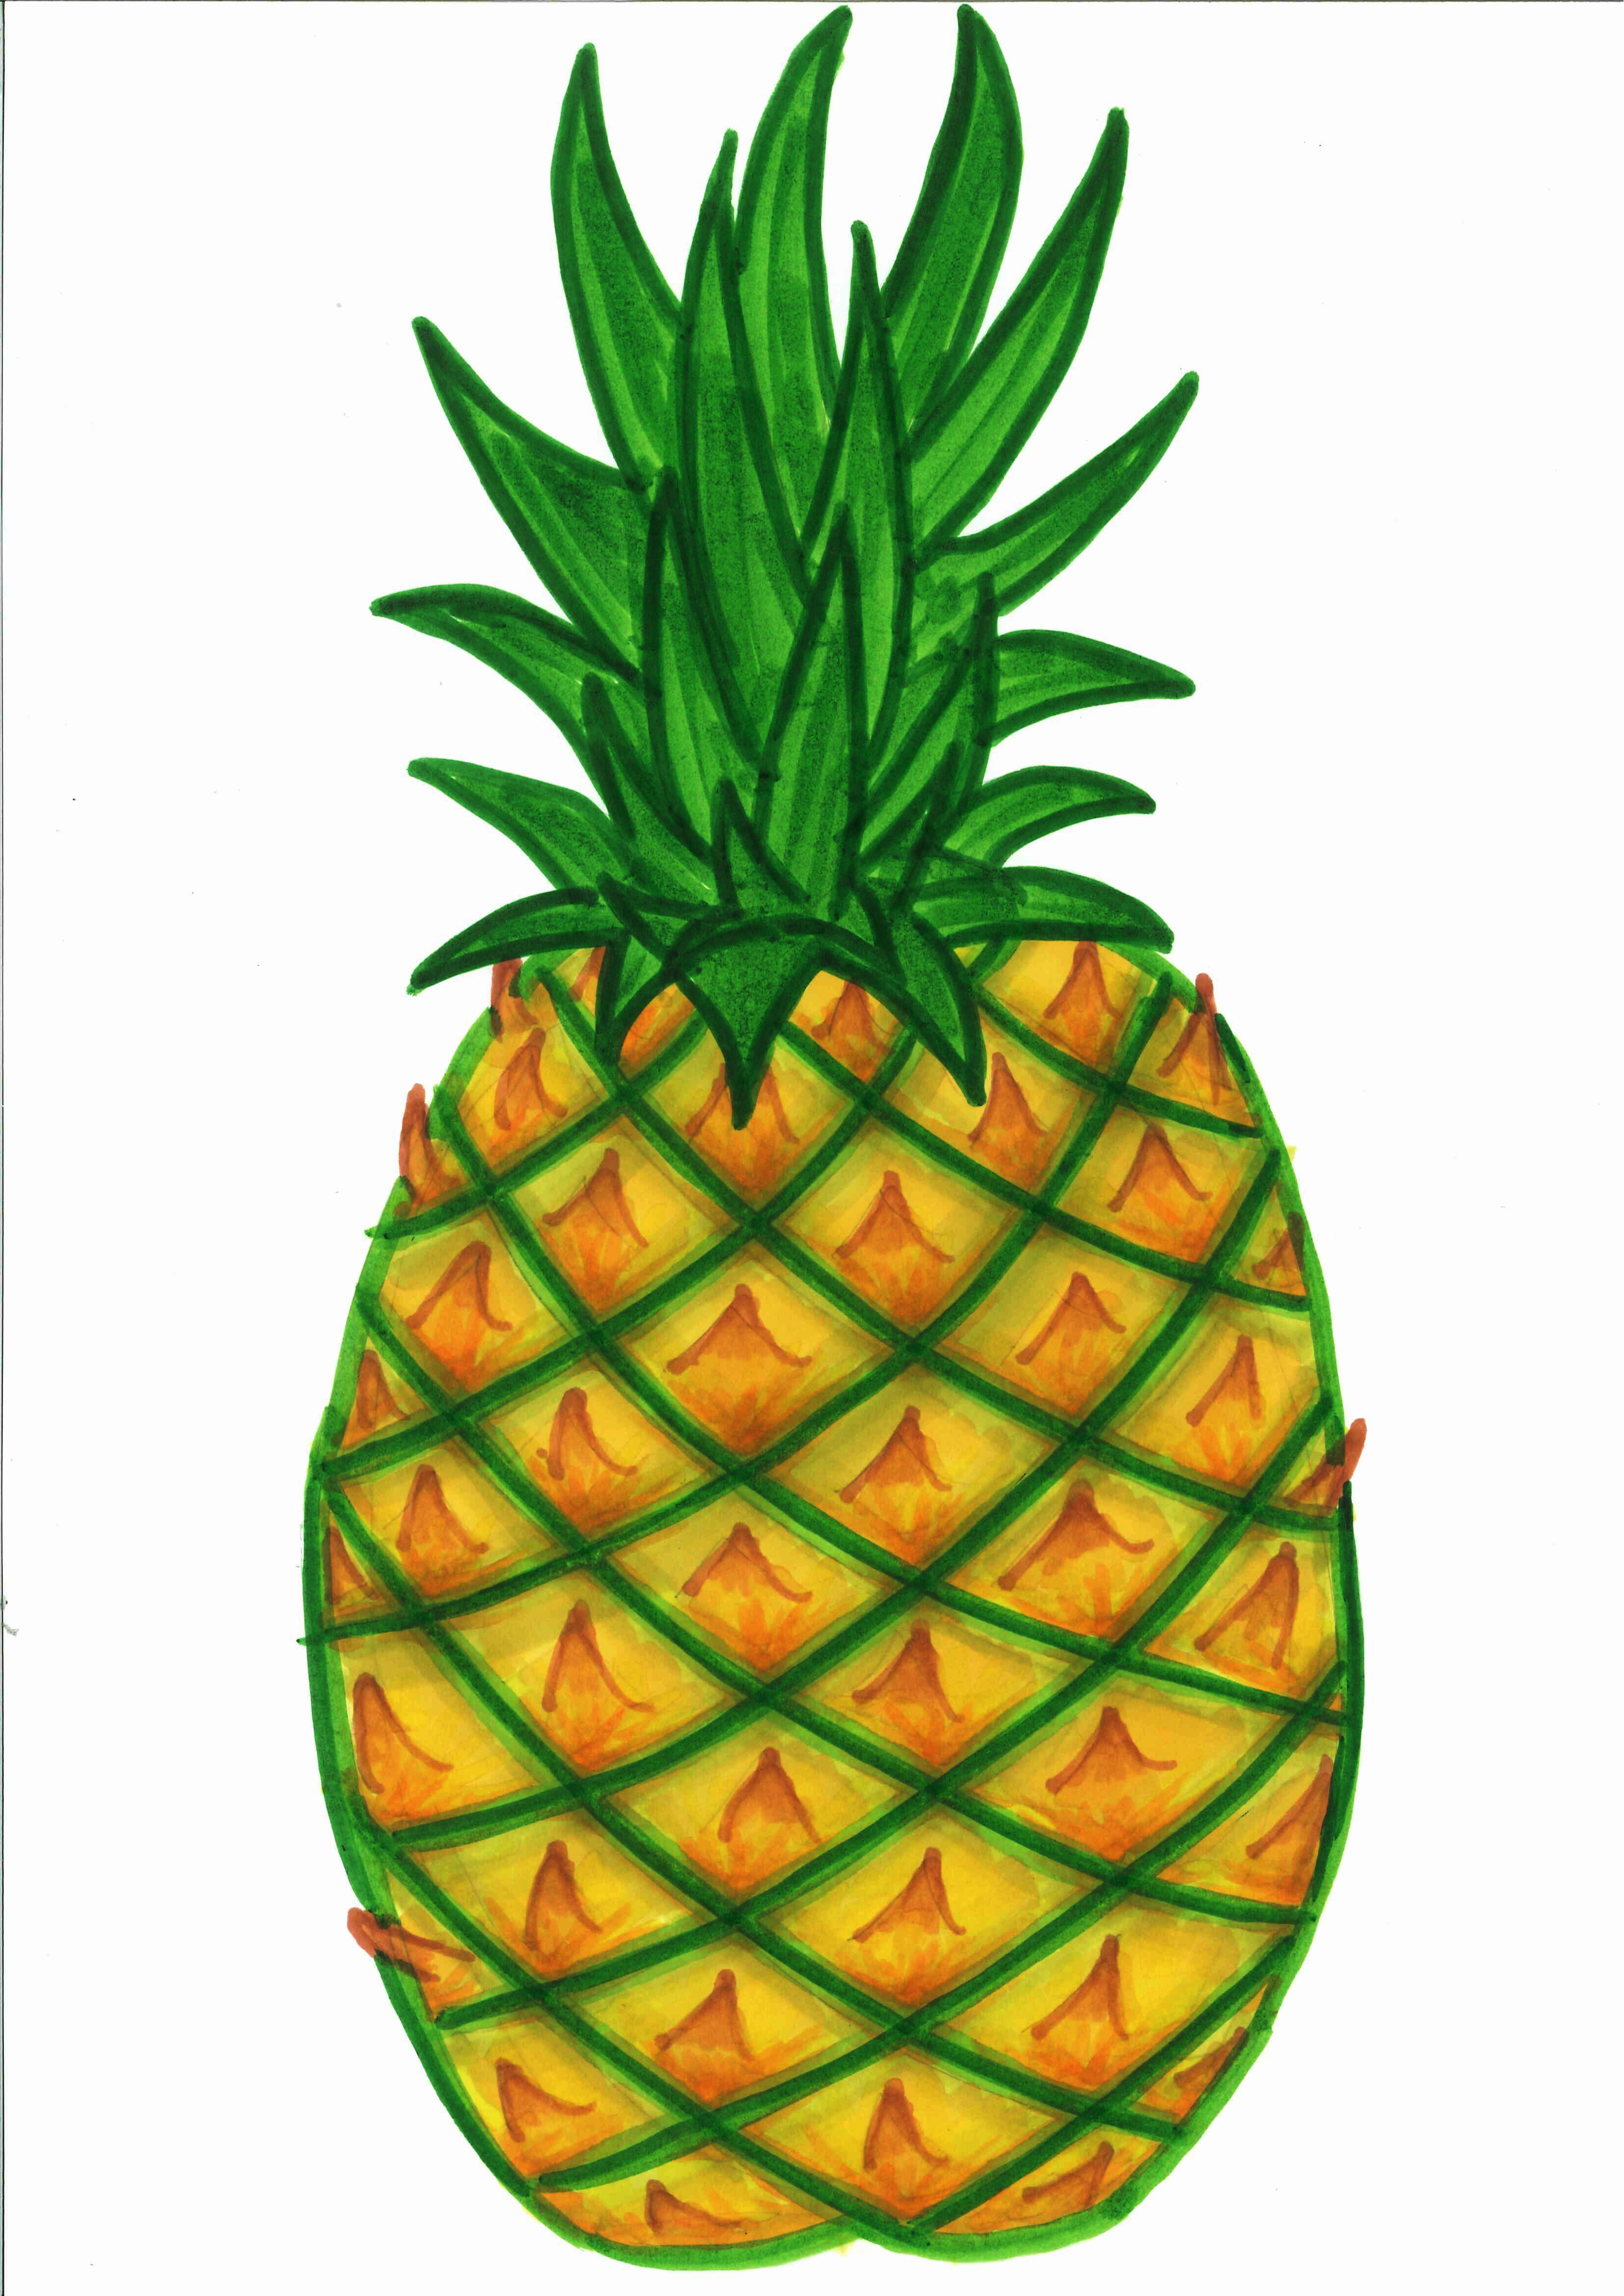 pineapple clipart black and white